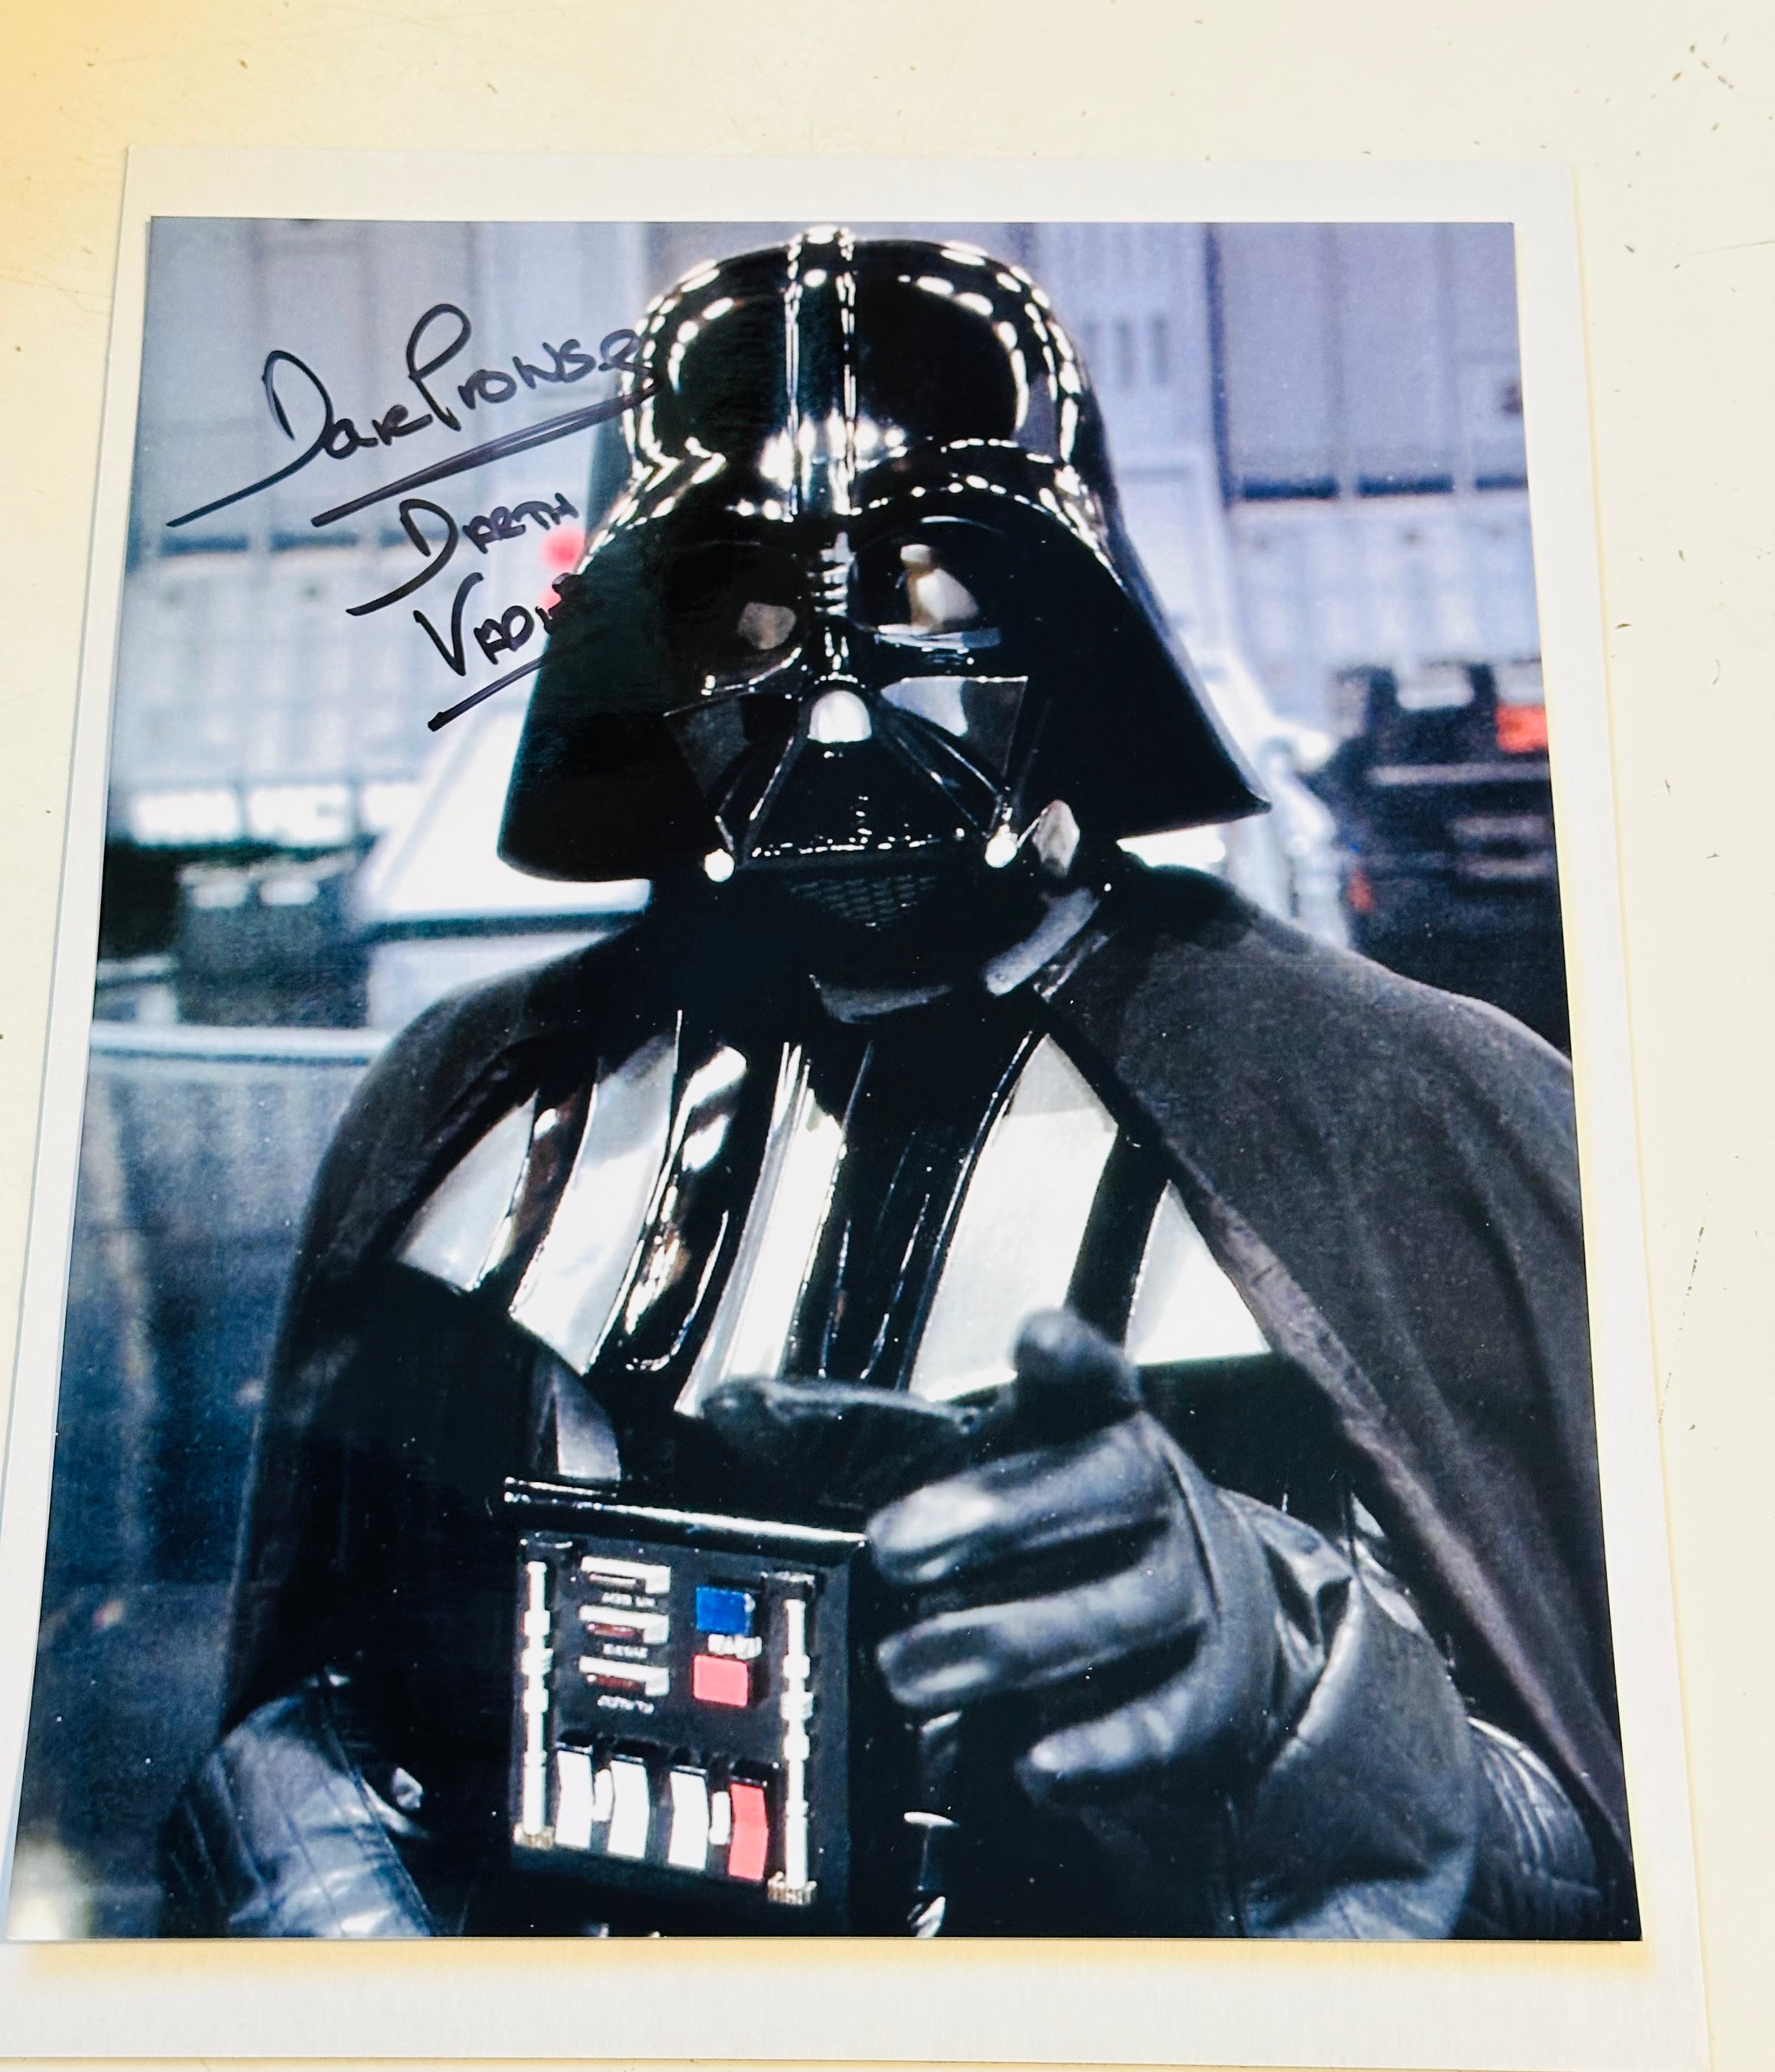 Star Wars Darth Vader David Prowse rare autograph 8x10 photo certified by Fanexpo with COA and hologram